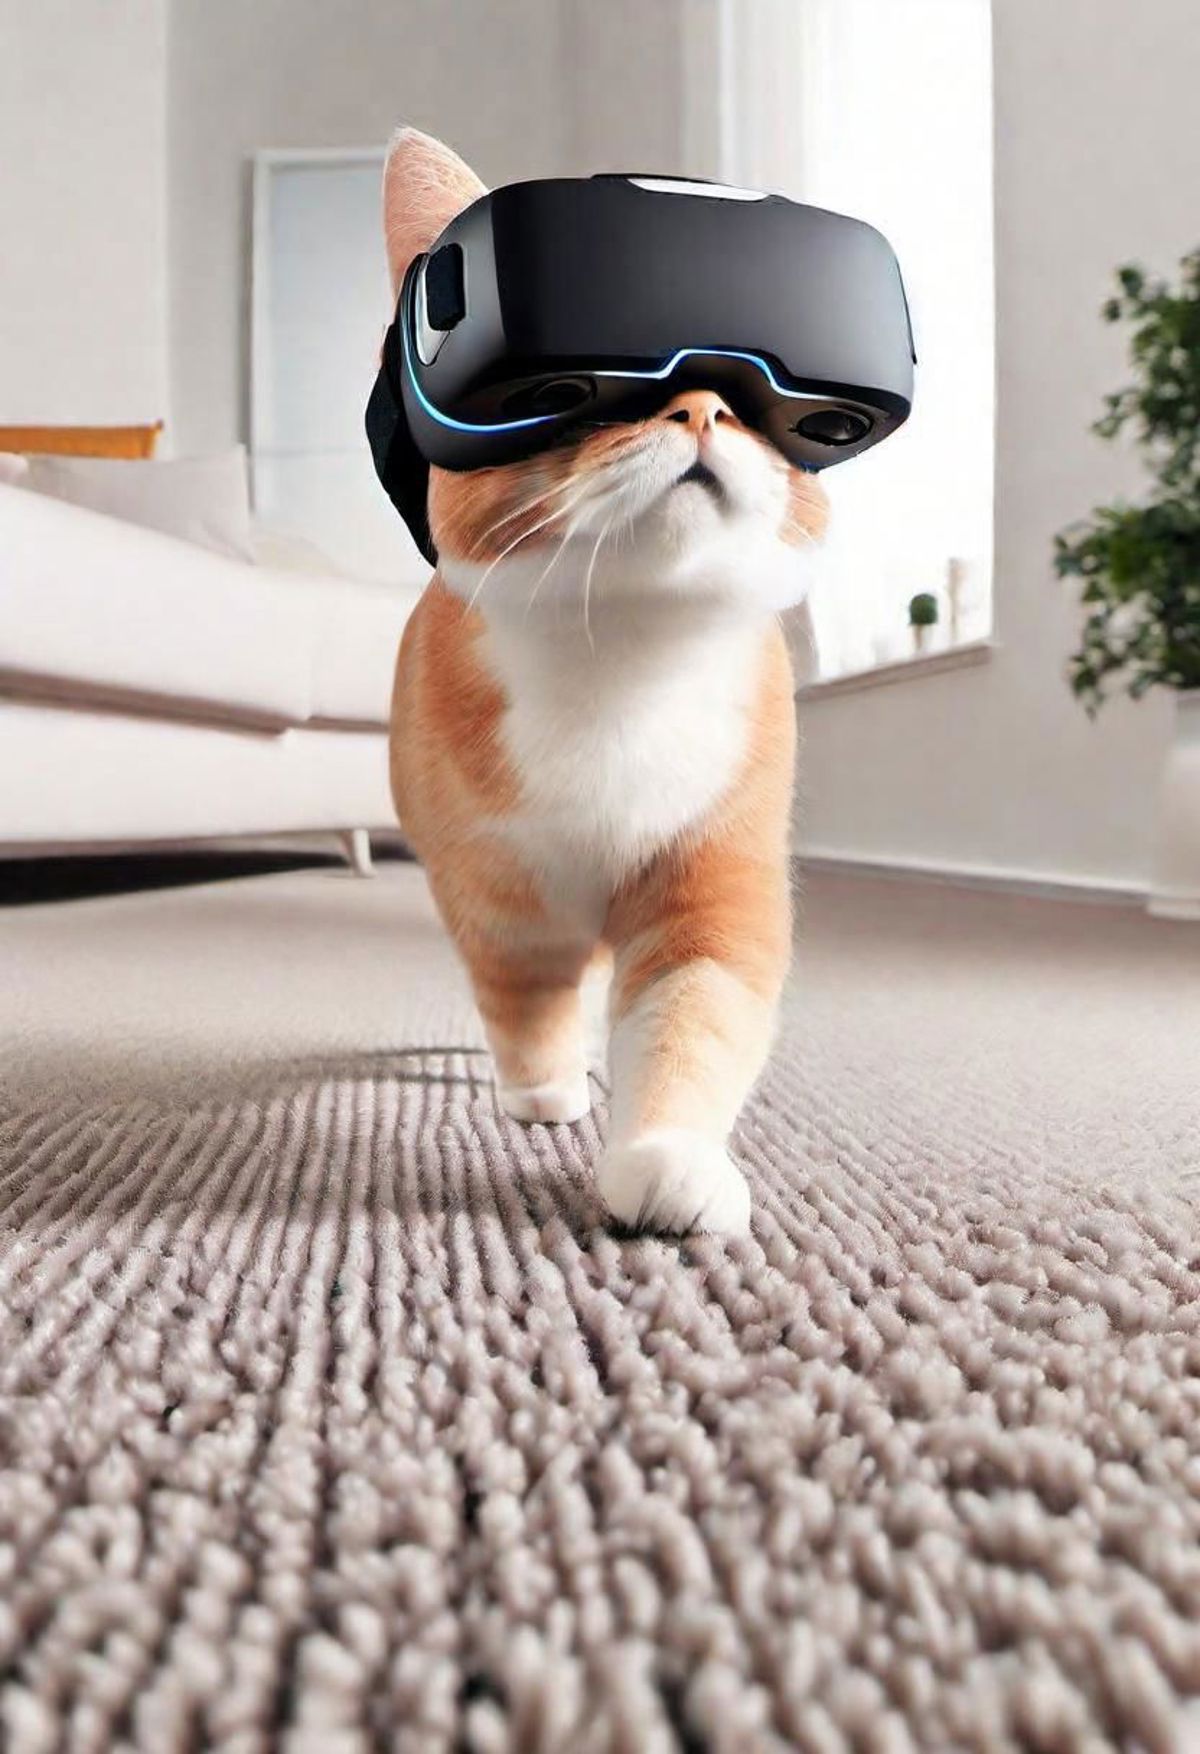 A brown and white cat wearing a VR headset and walking on a carpet.